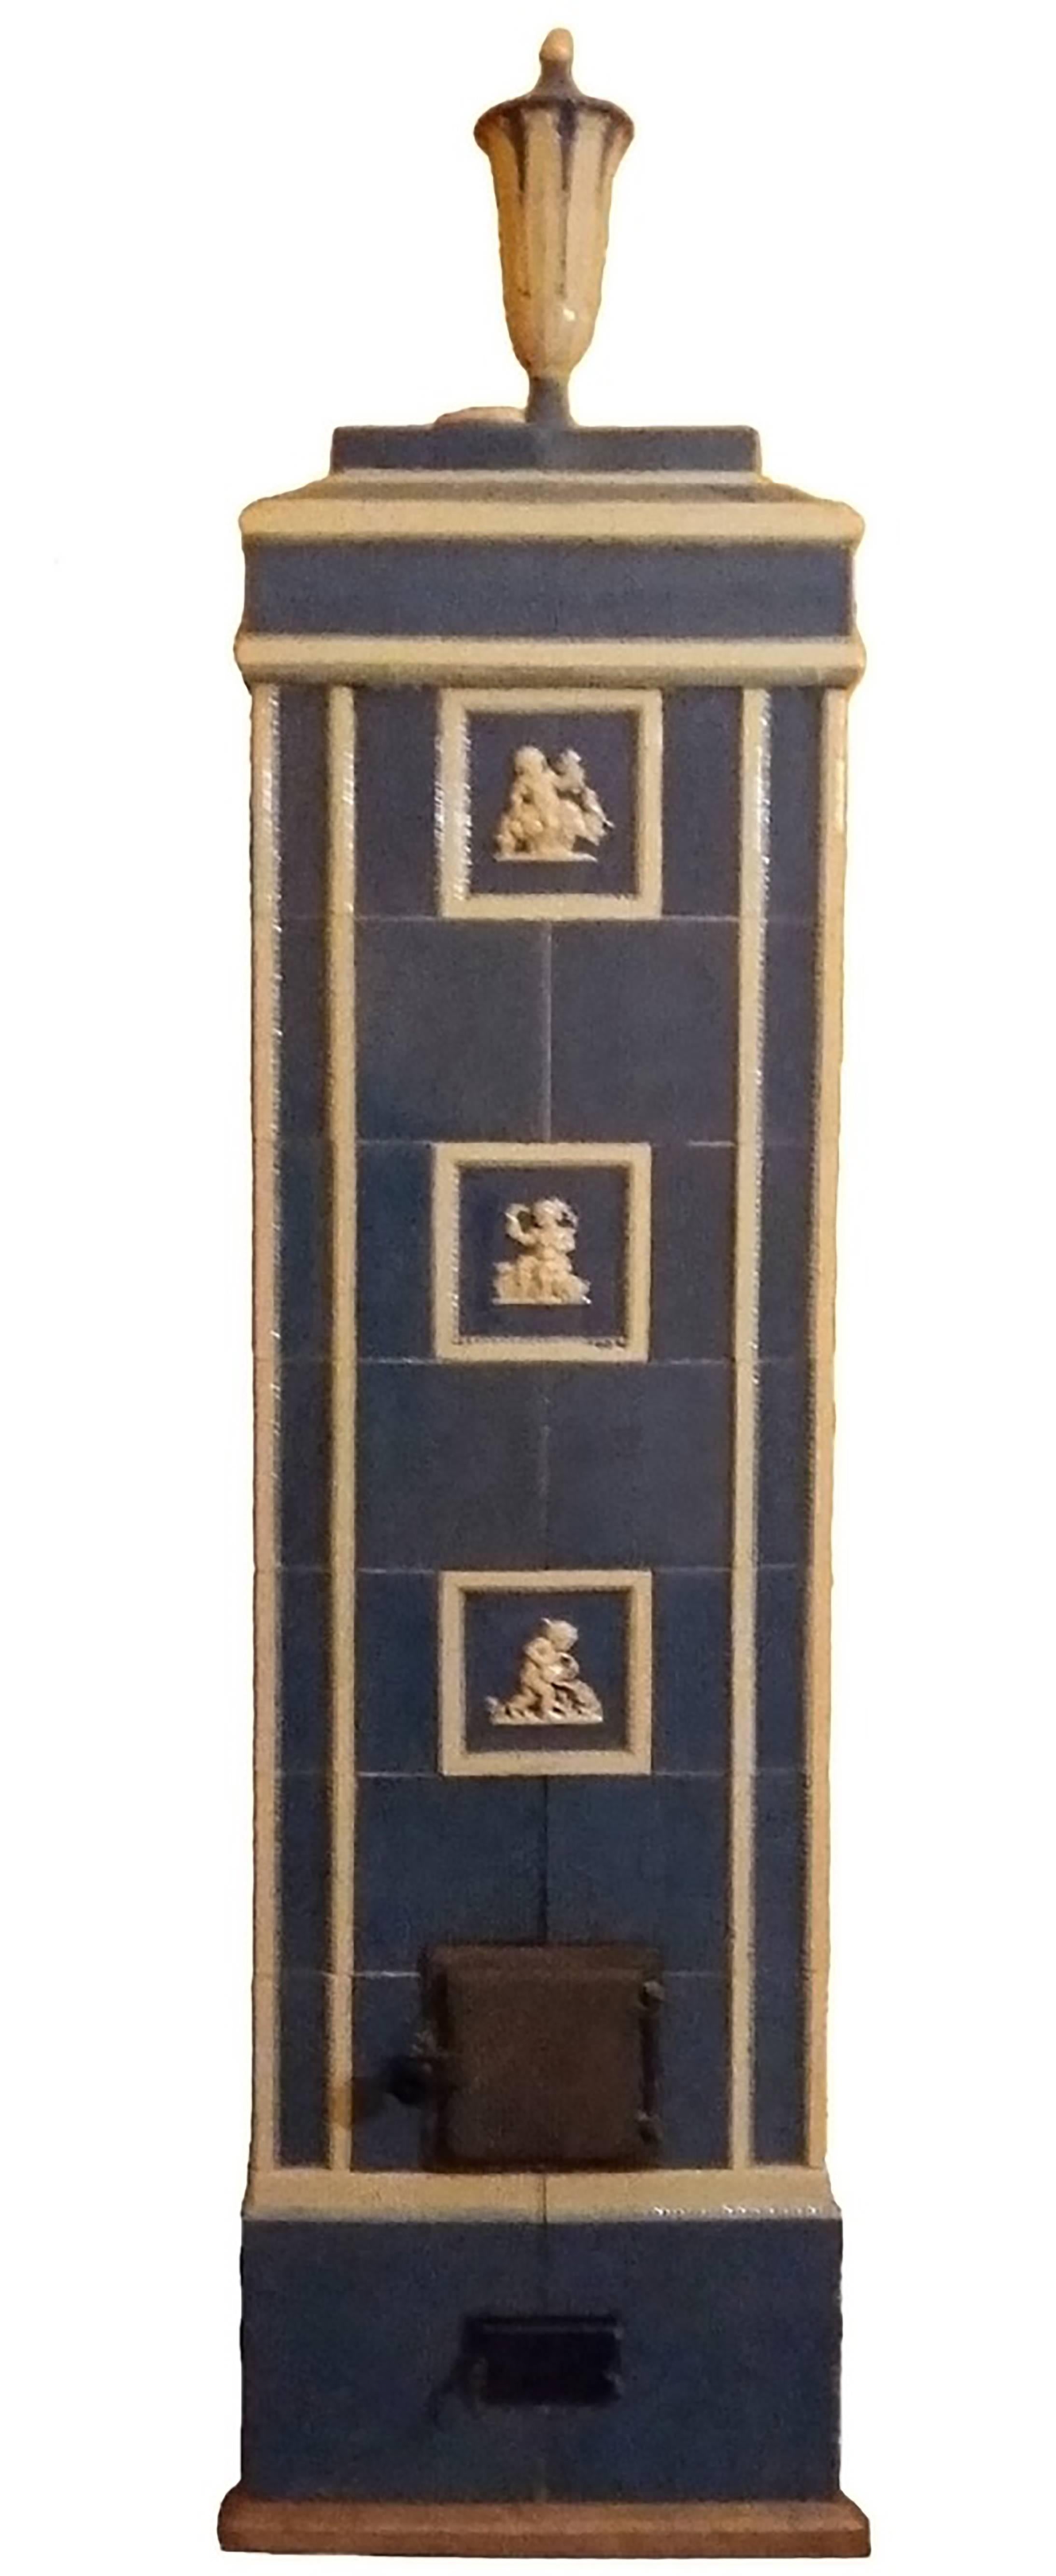 Vienna Secession Tile Stove in Prussian Blue and White by Michael Powolny, Austria 1910. For Sale